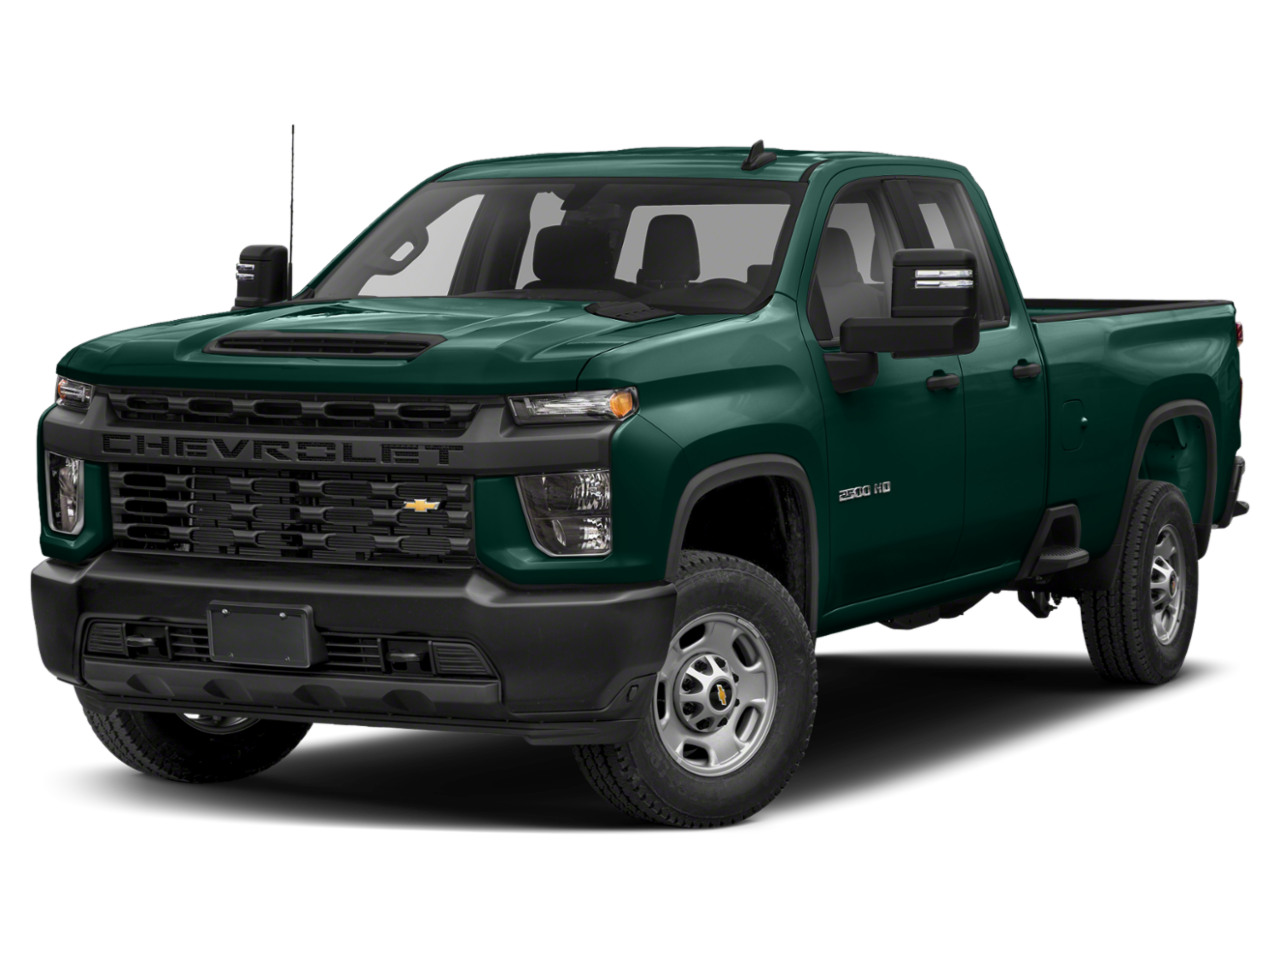 New Chevrolet Silverado 2500HD from your Muncie, IN dealership, All